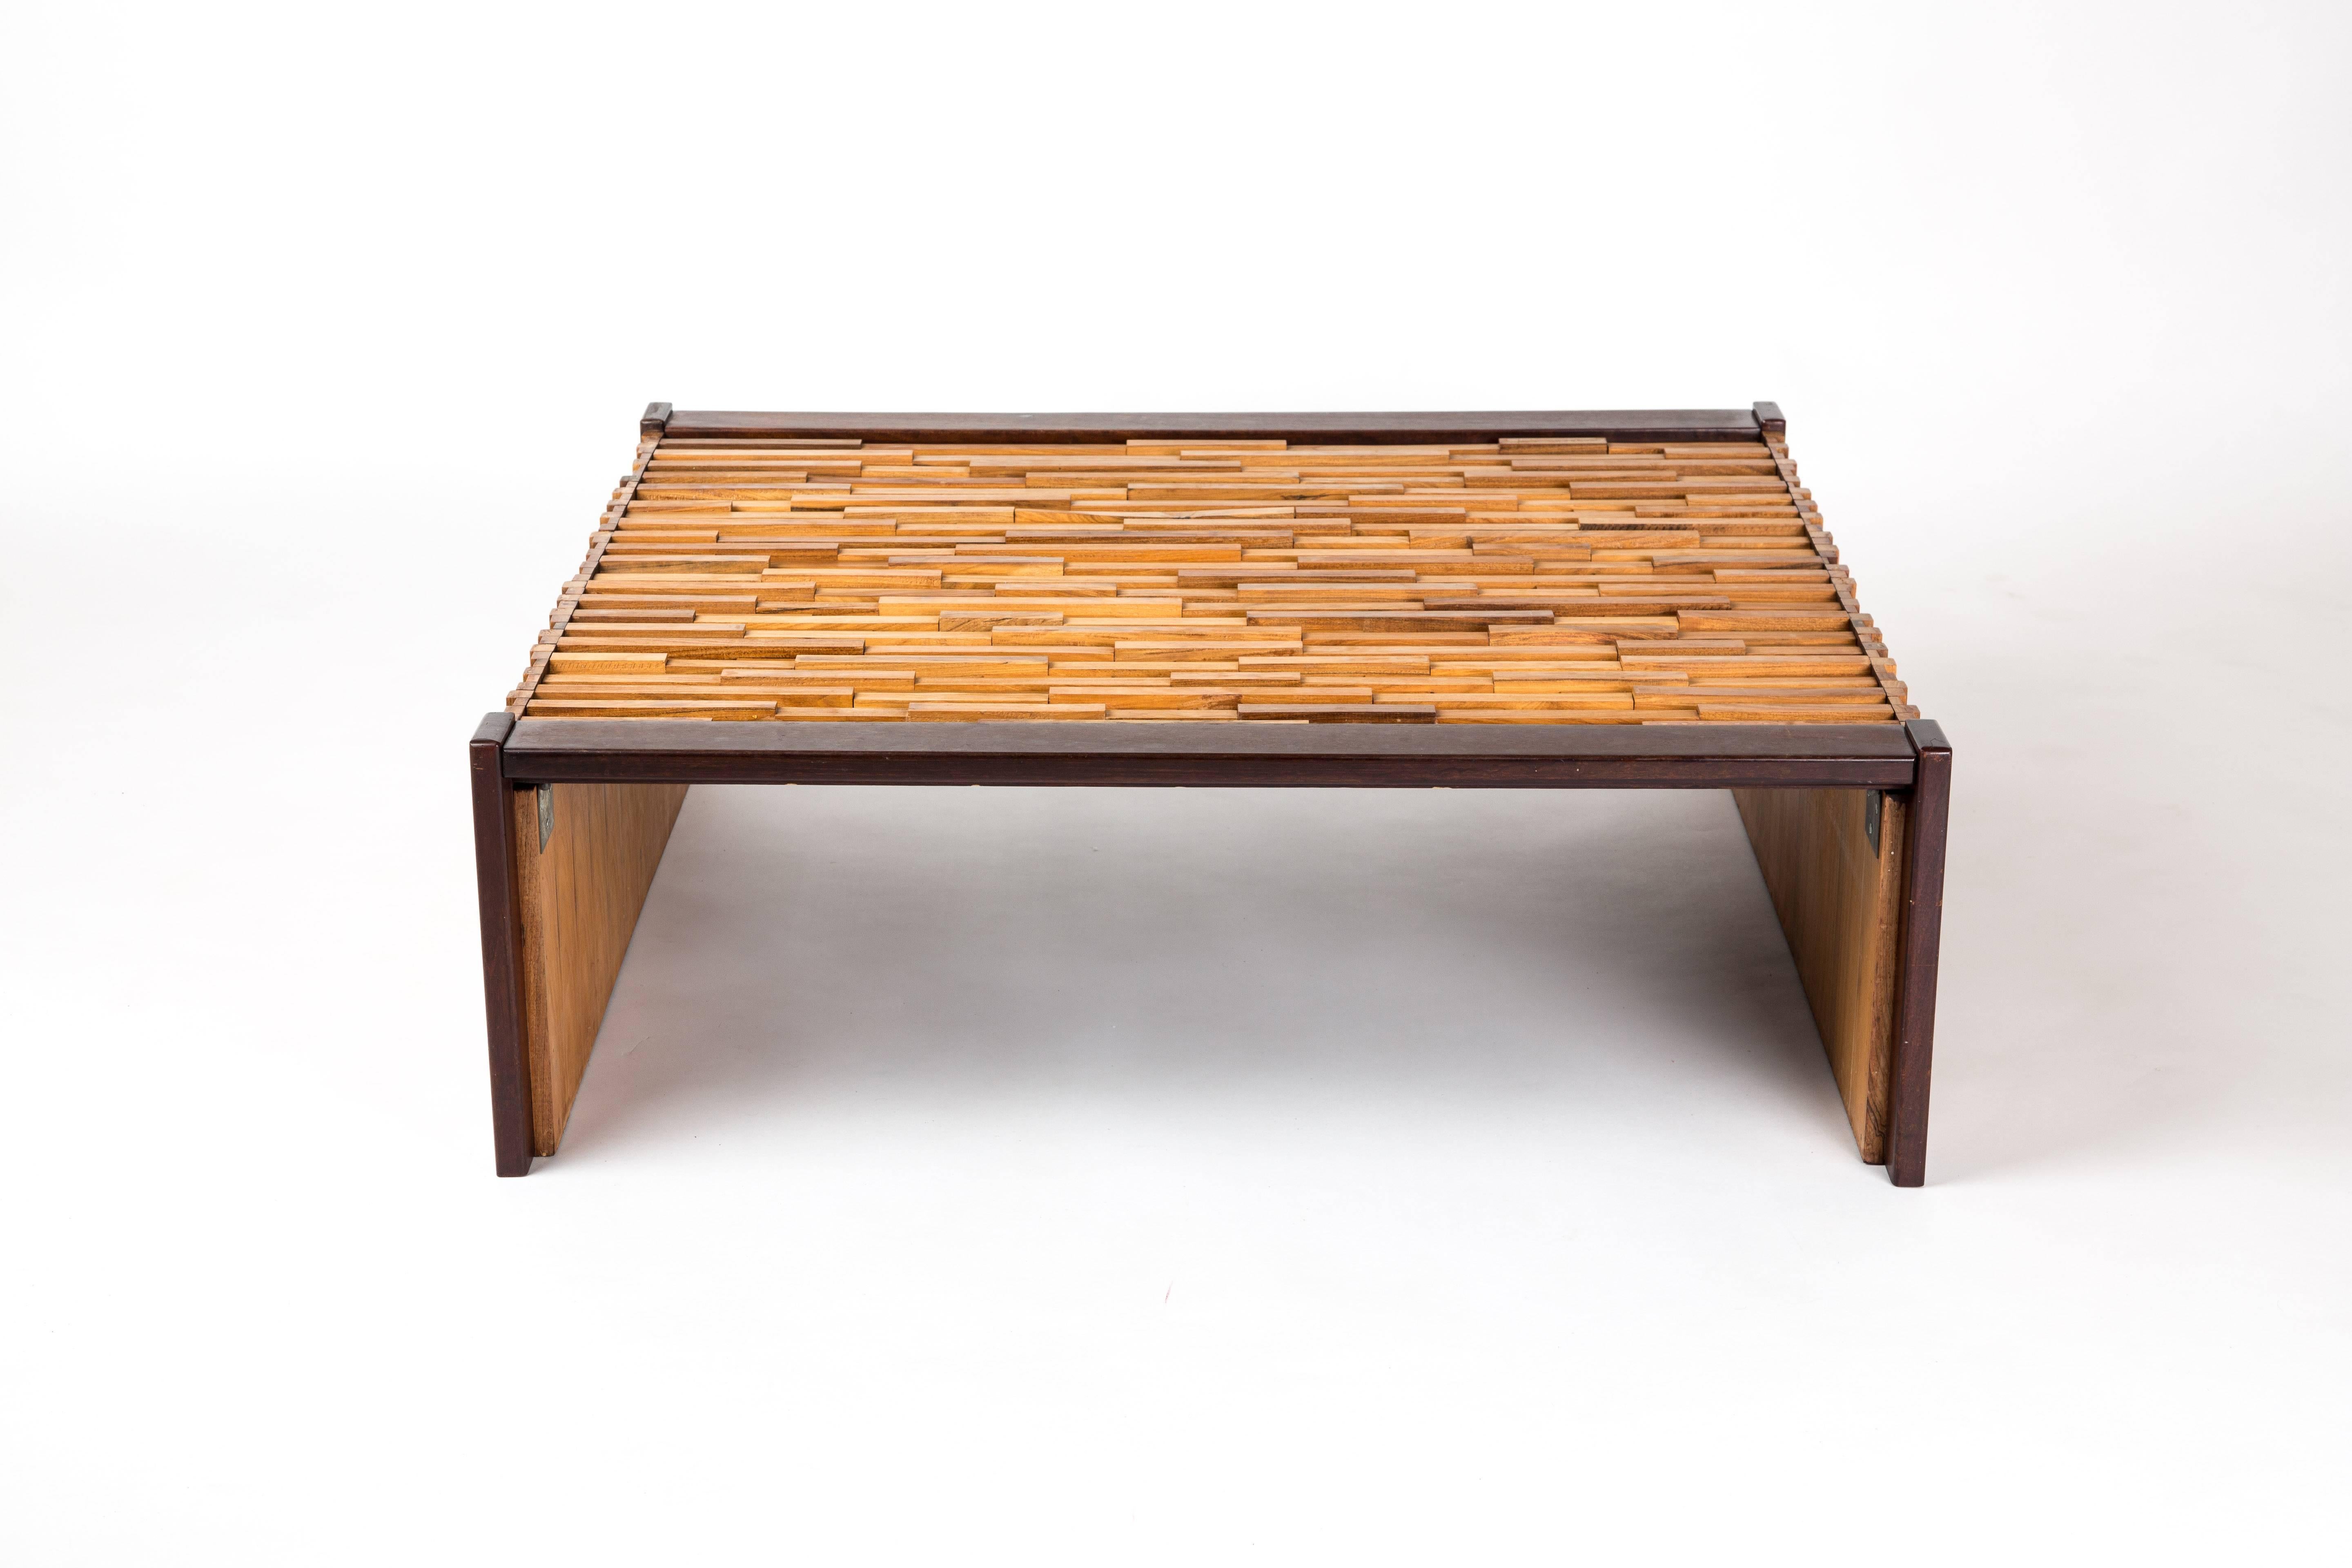 PERCIFAL LAFER mixed tropical wood coffee table, Brazilian brutalist style  3